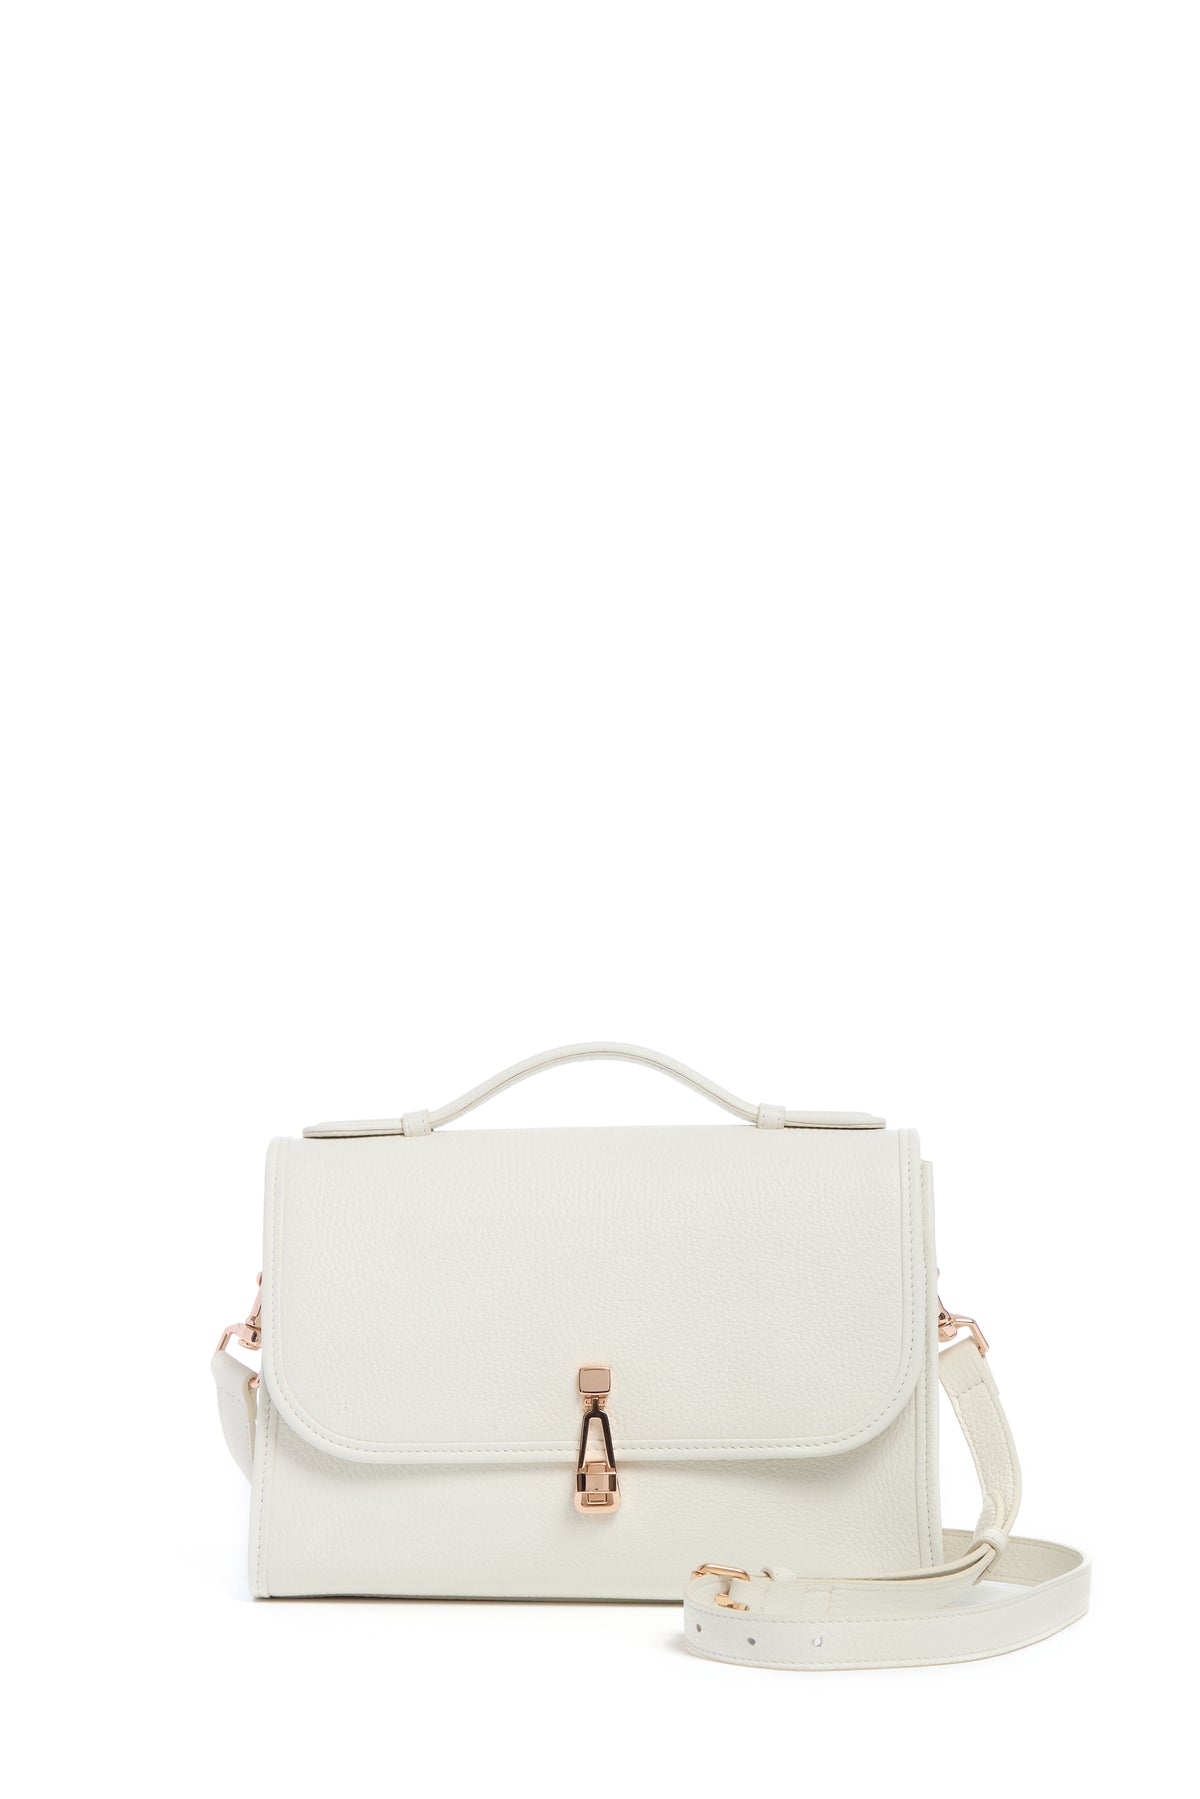 Medium Leonora Bag in Ivory Grained Leather